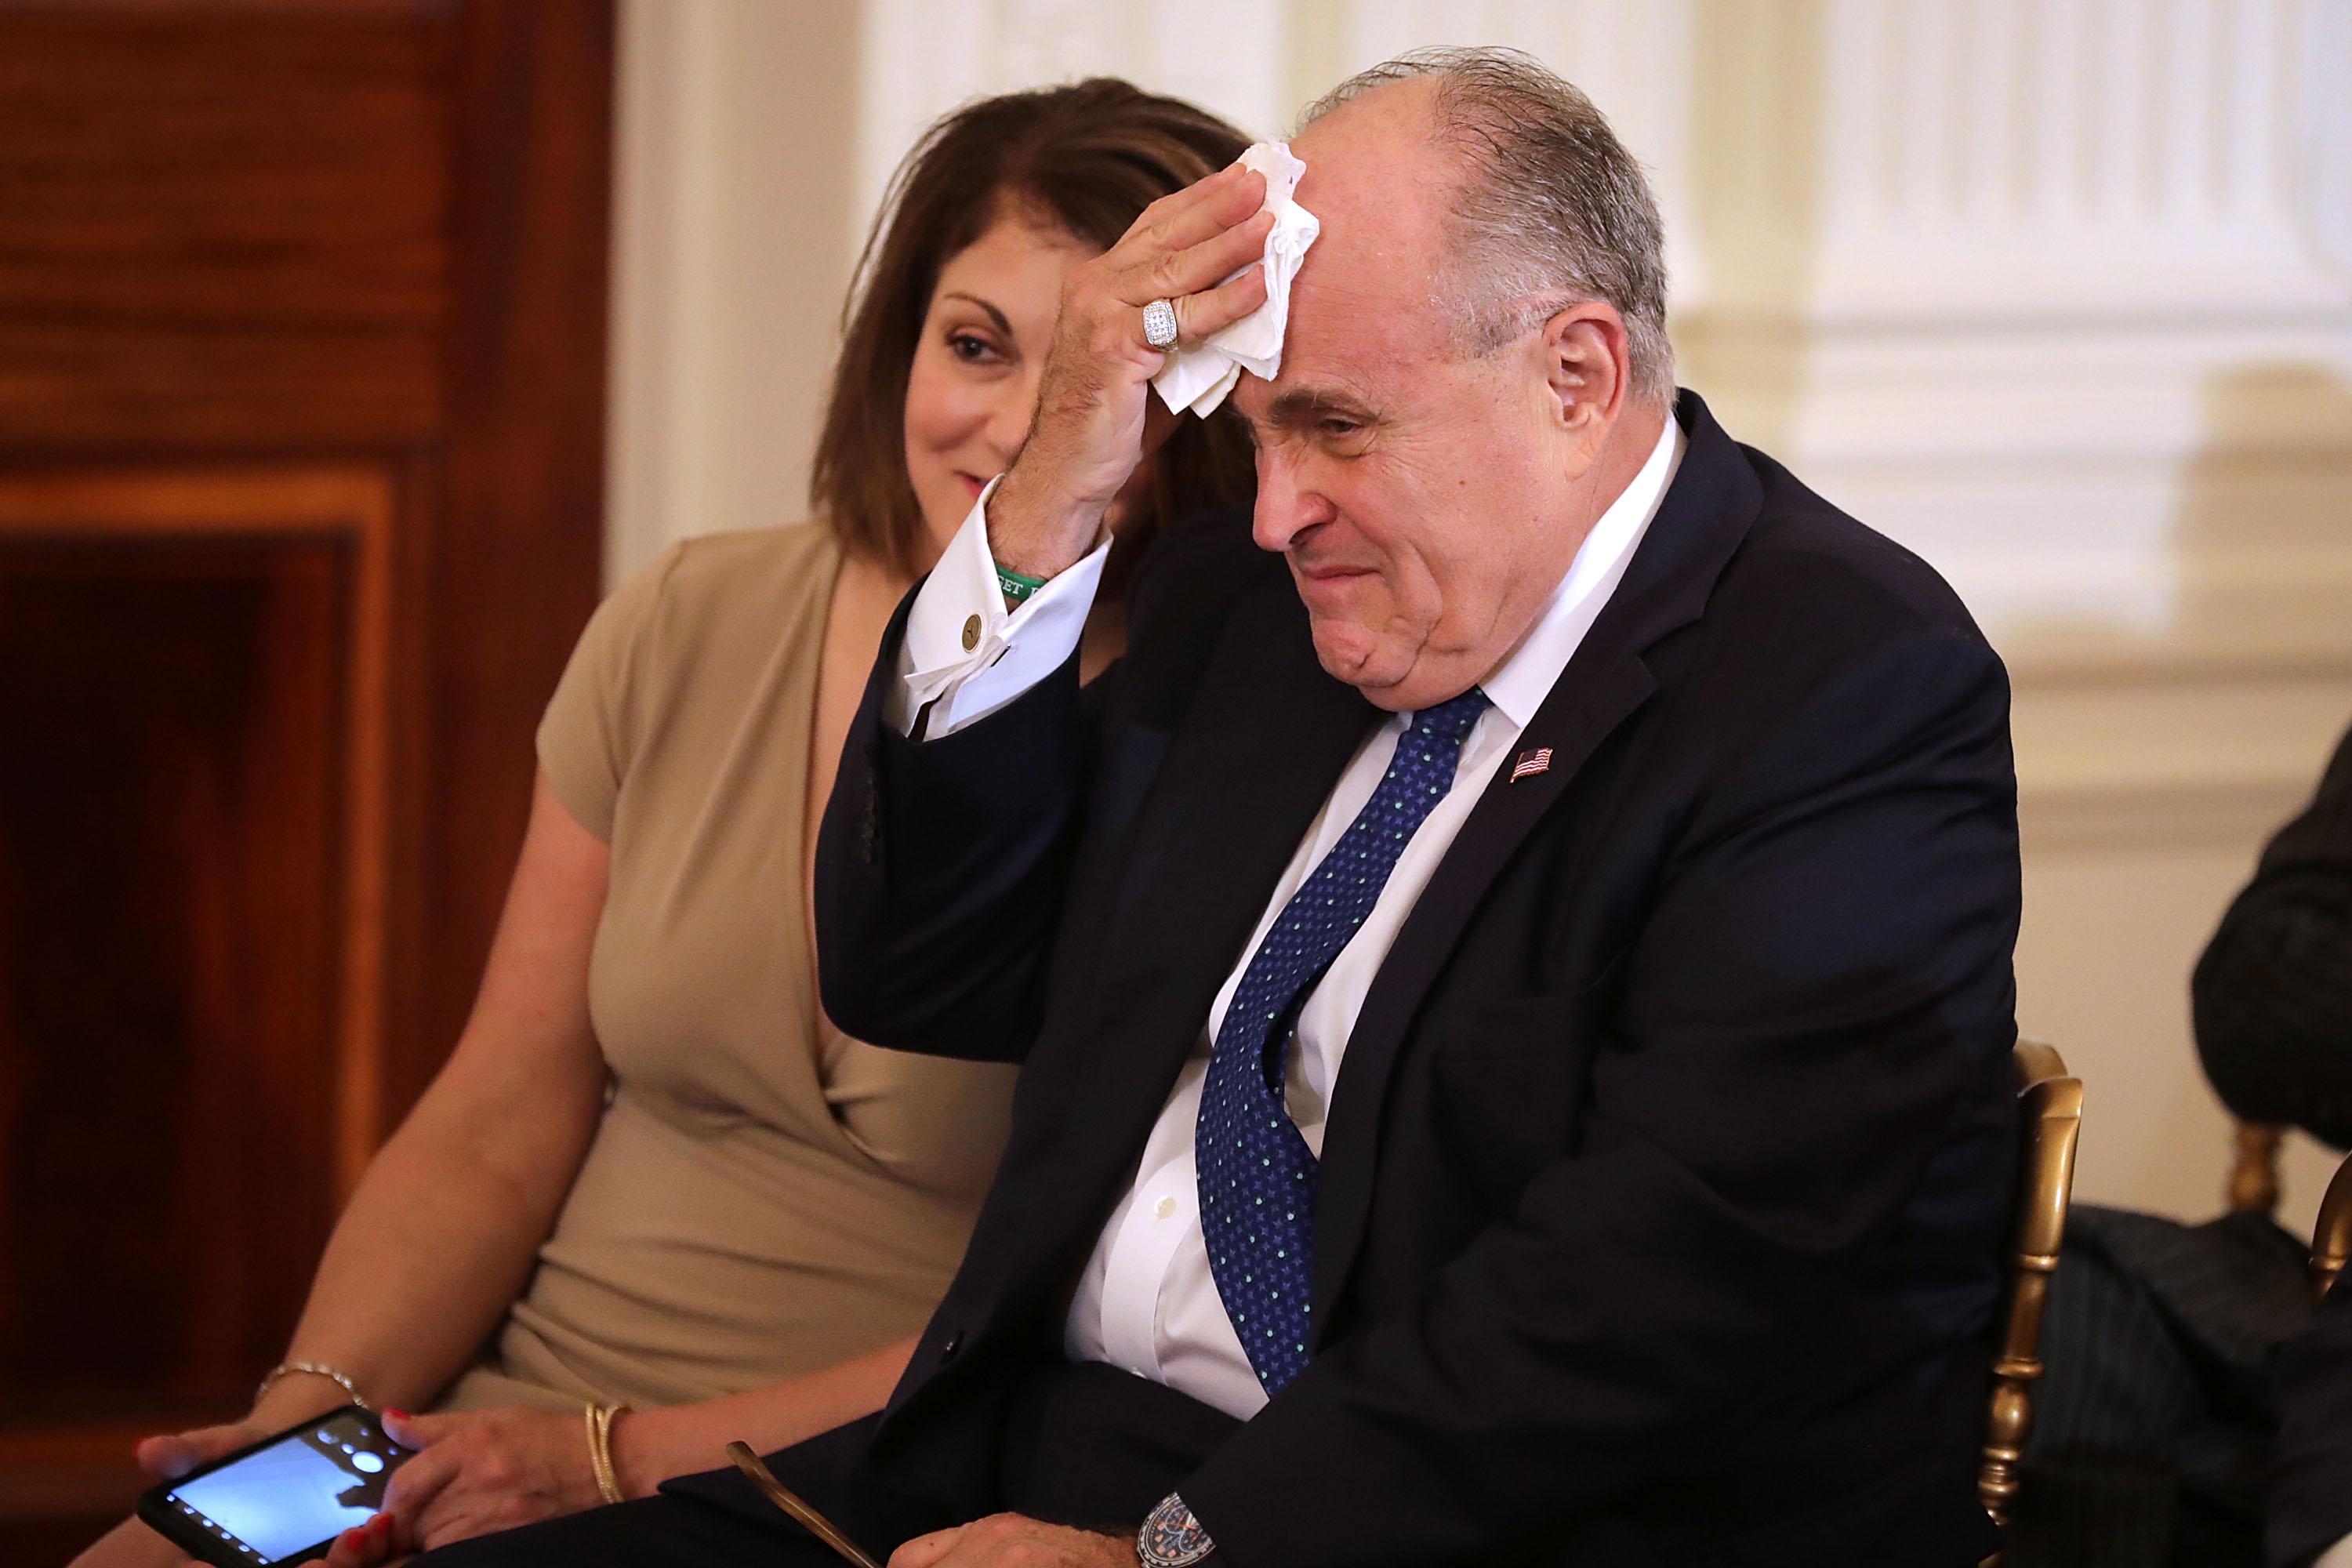 Former New York City Mayor Rudy Giuliani (R) and his wife Judith Giuliani arrive in the East Room before U.S. President Donald Trump introduces Judge Brett Kavanaugh as his nominee to the United States Supreme Court at the White House July 9, 2018 in Washington, D.C.